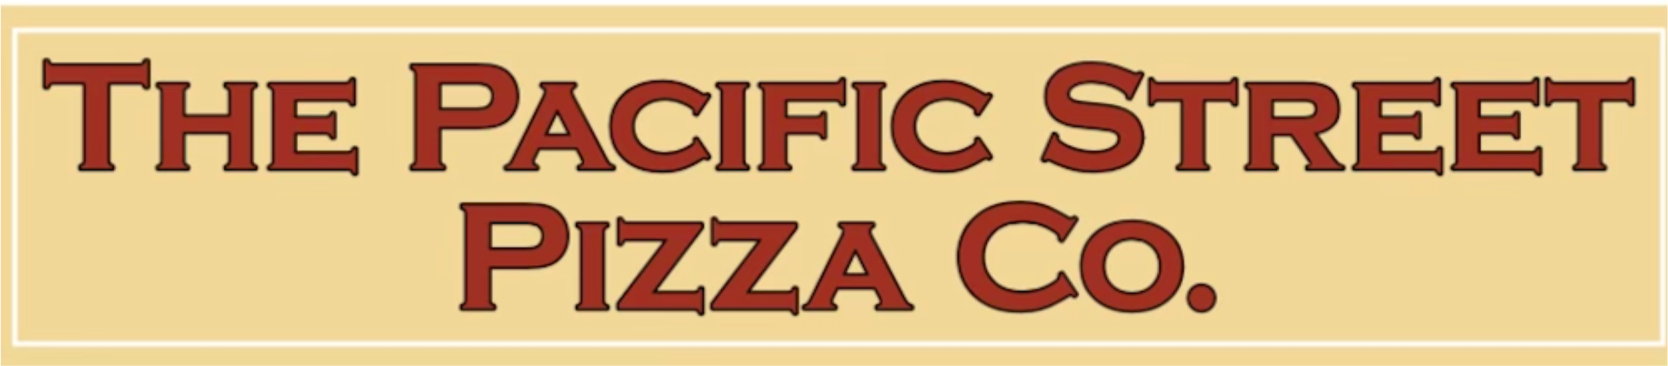 The Pacific Street Pizza Co. Home